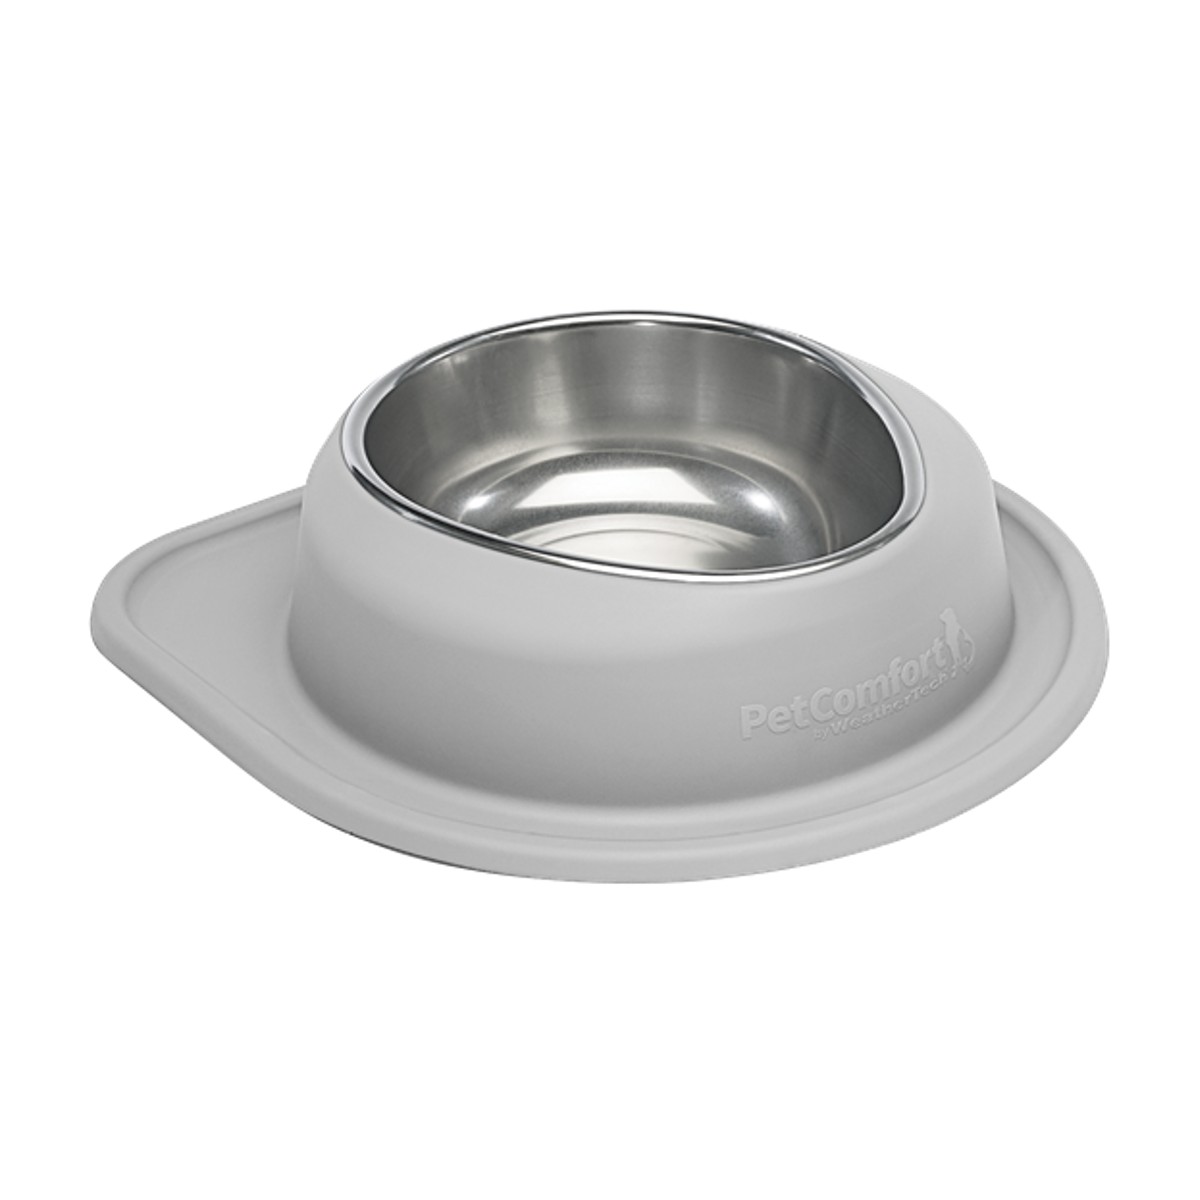 https://images.baxterboo.com/global/images/products/large/weathertech-low-single-diner-with-stainless-steel-dog-bowl-dark-gray-5012.jpg